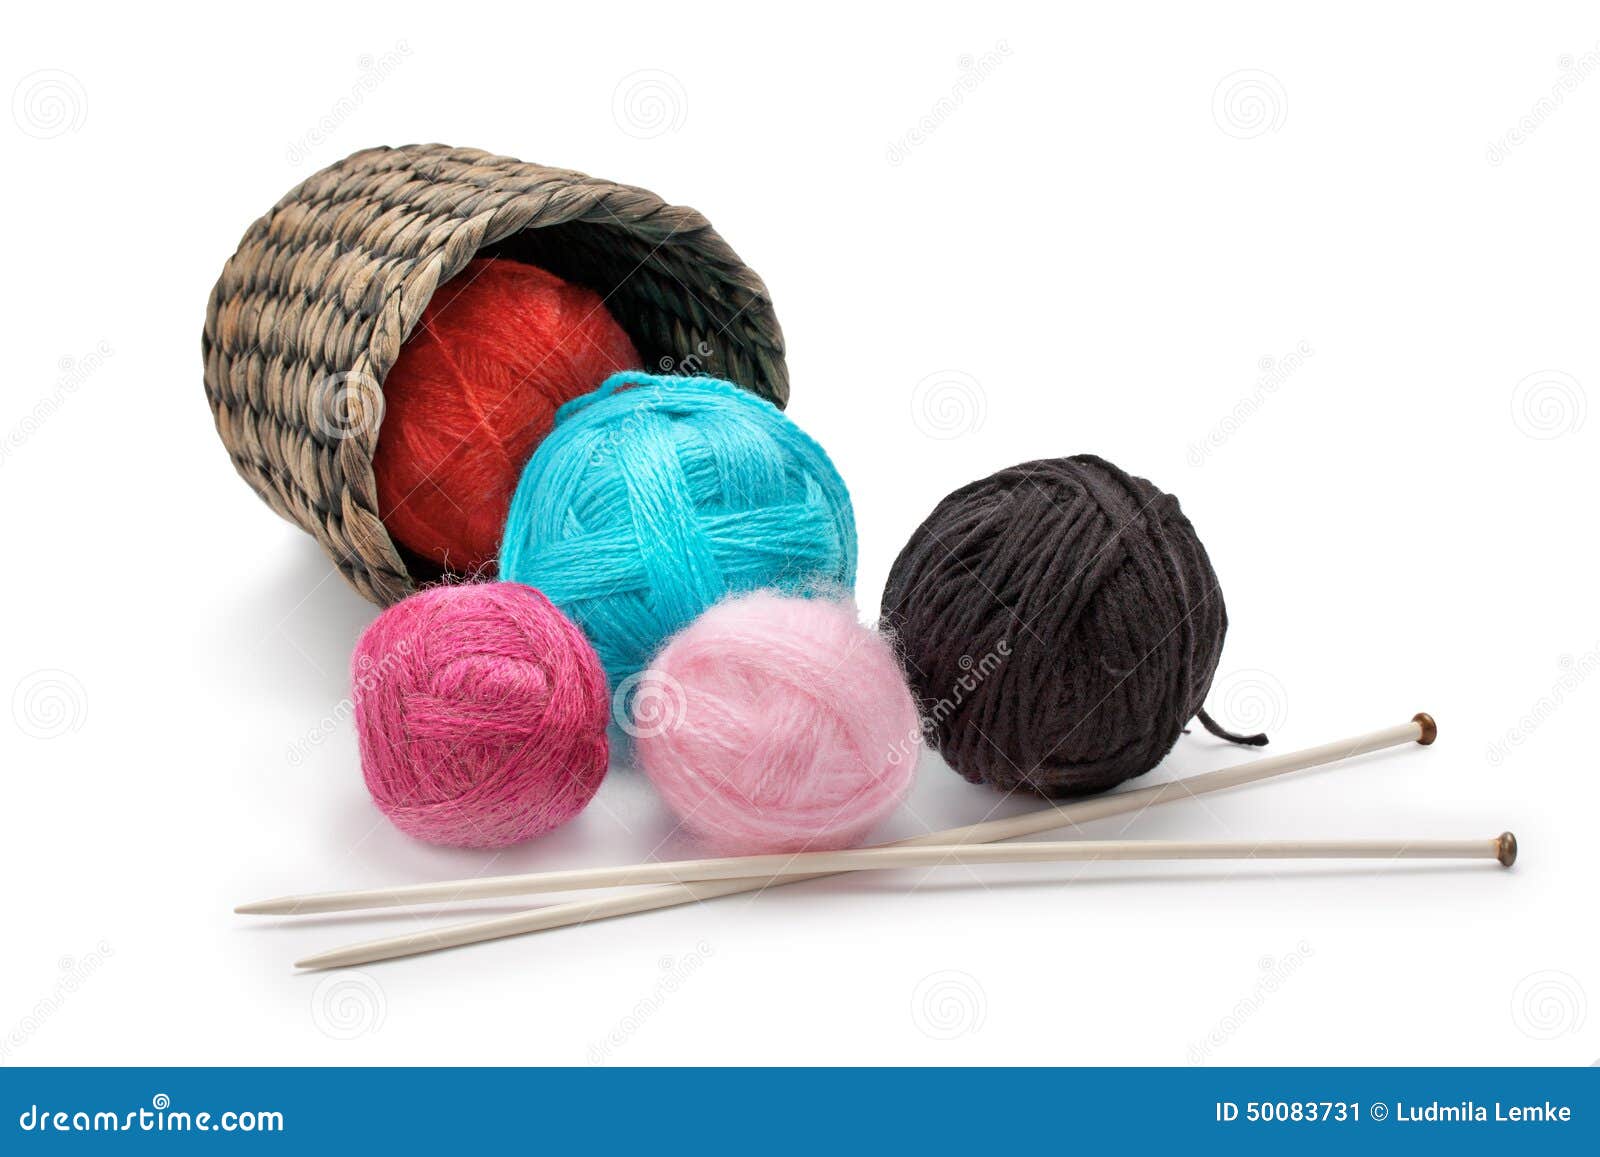 yarn and knitting needles arranged in a basket